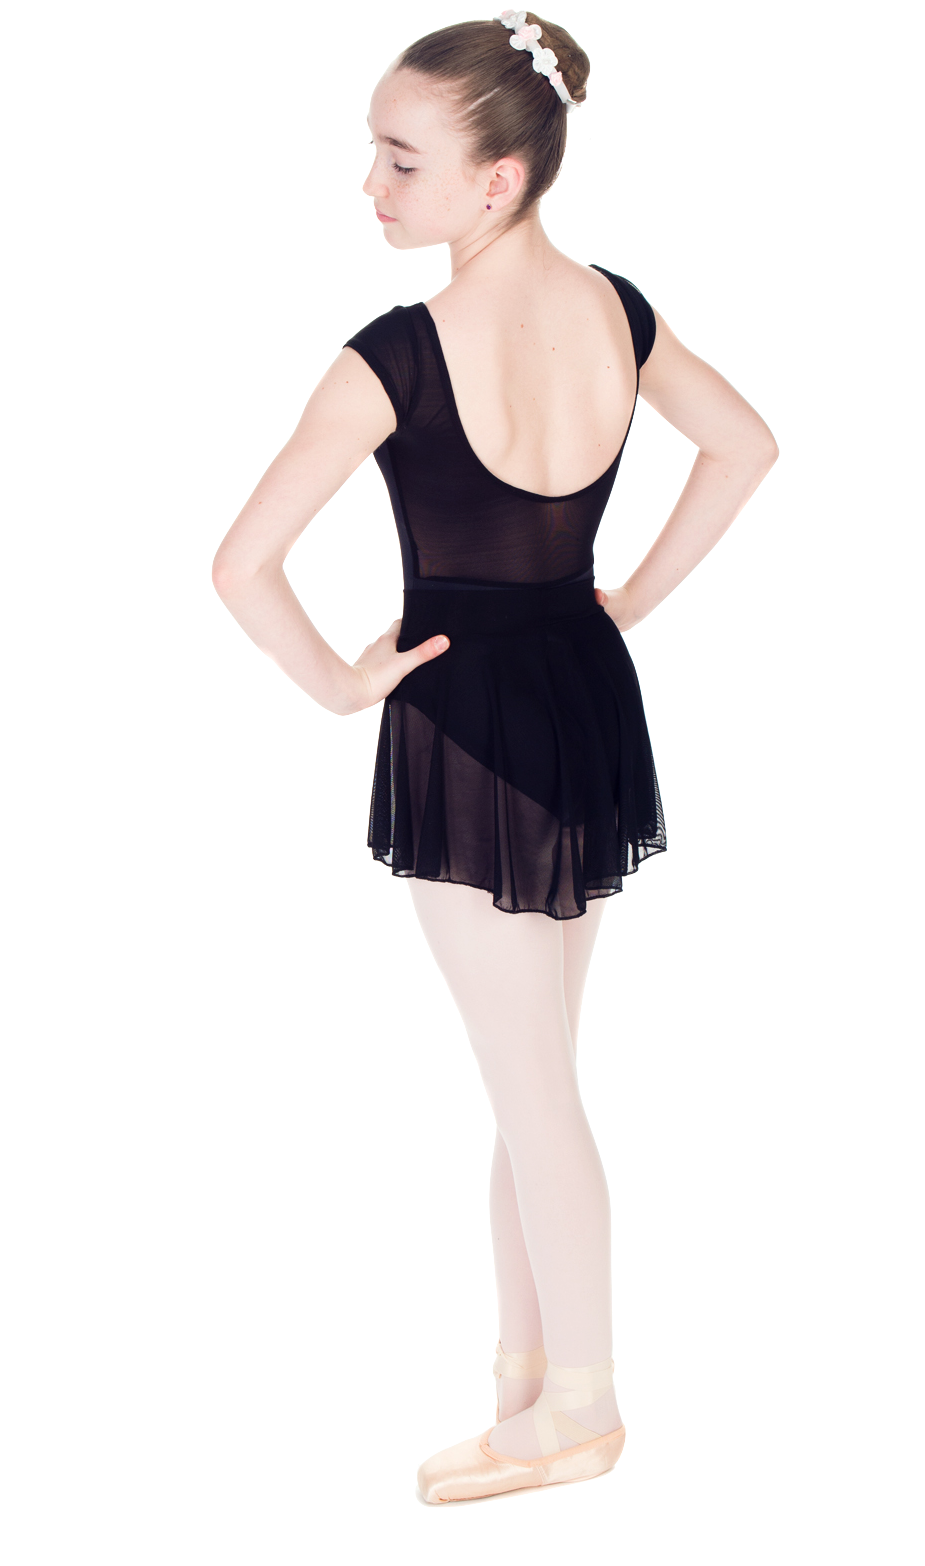 "Aurora" Cap Sleeved Leotard with Velvet Inset and Lace or Mesh Details - Custom Designed Leotards - Child and Adult Sizes